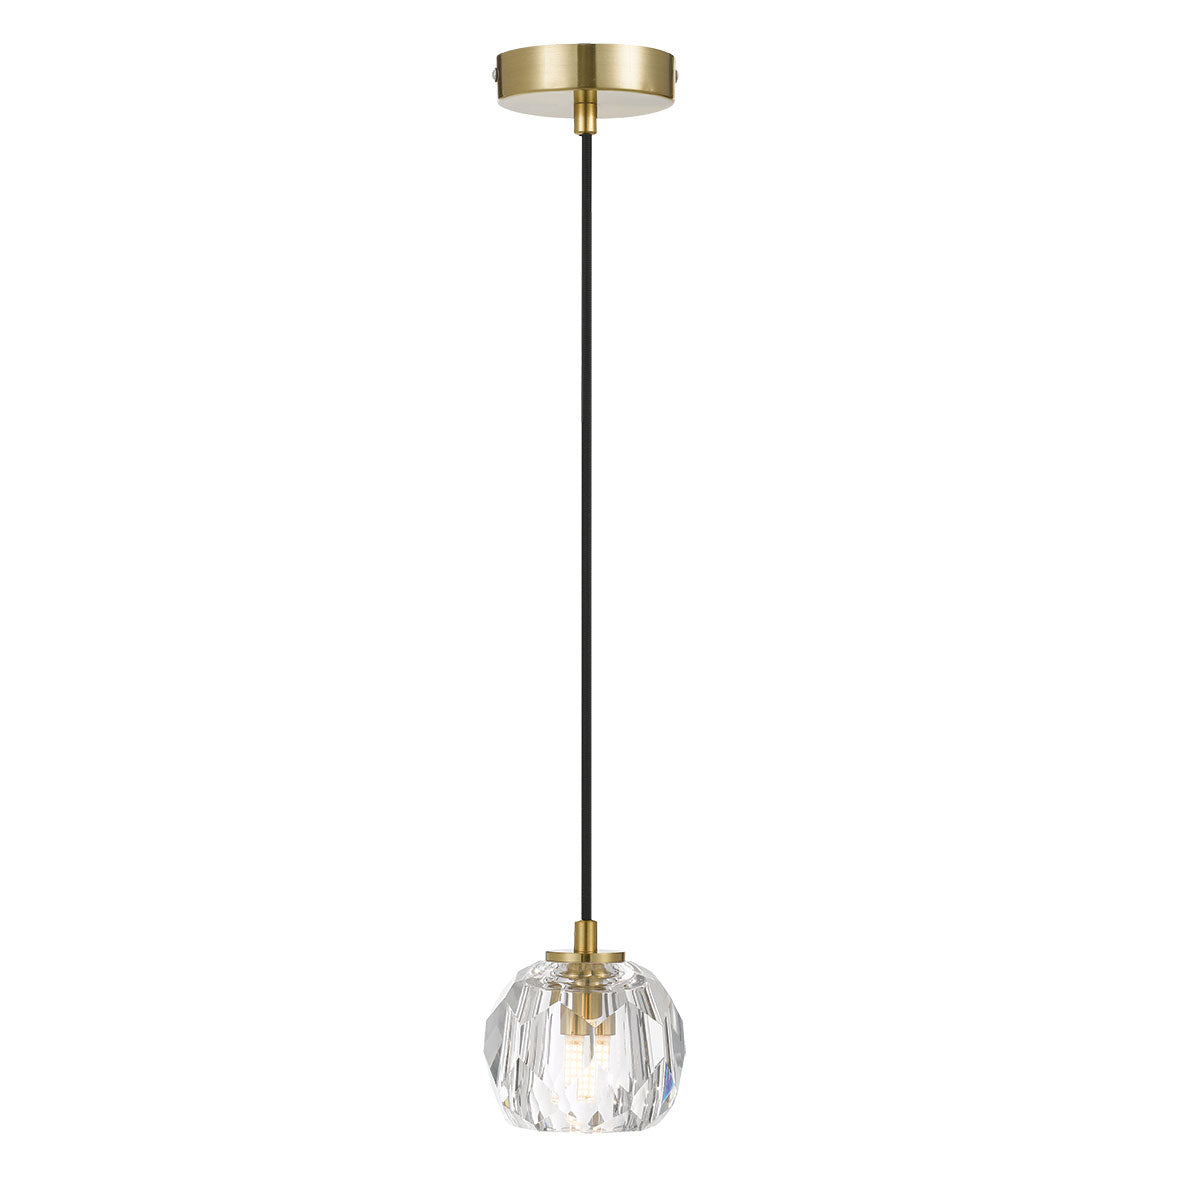 Zaha 1 Light Antique Gold with Crystal Pendant